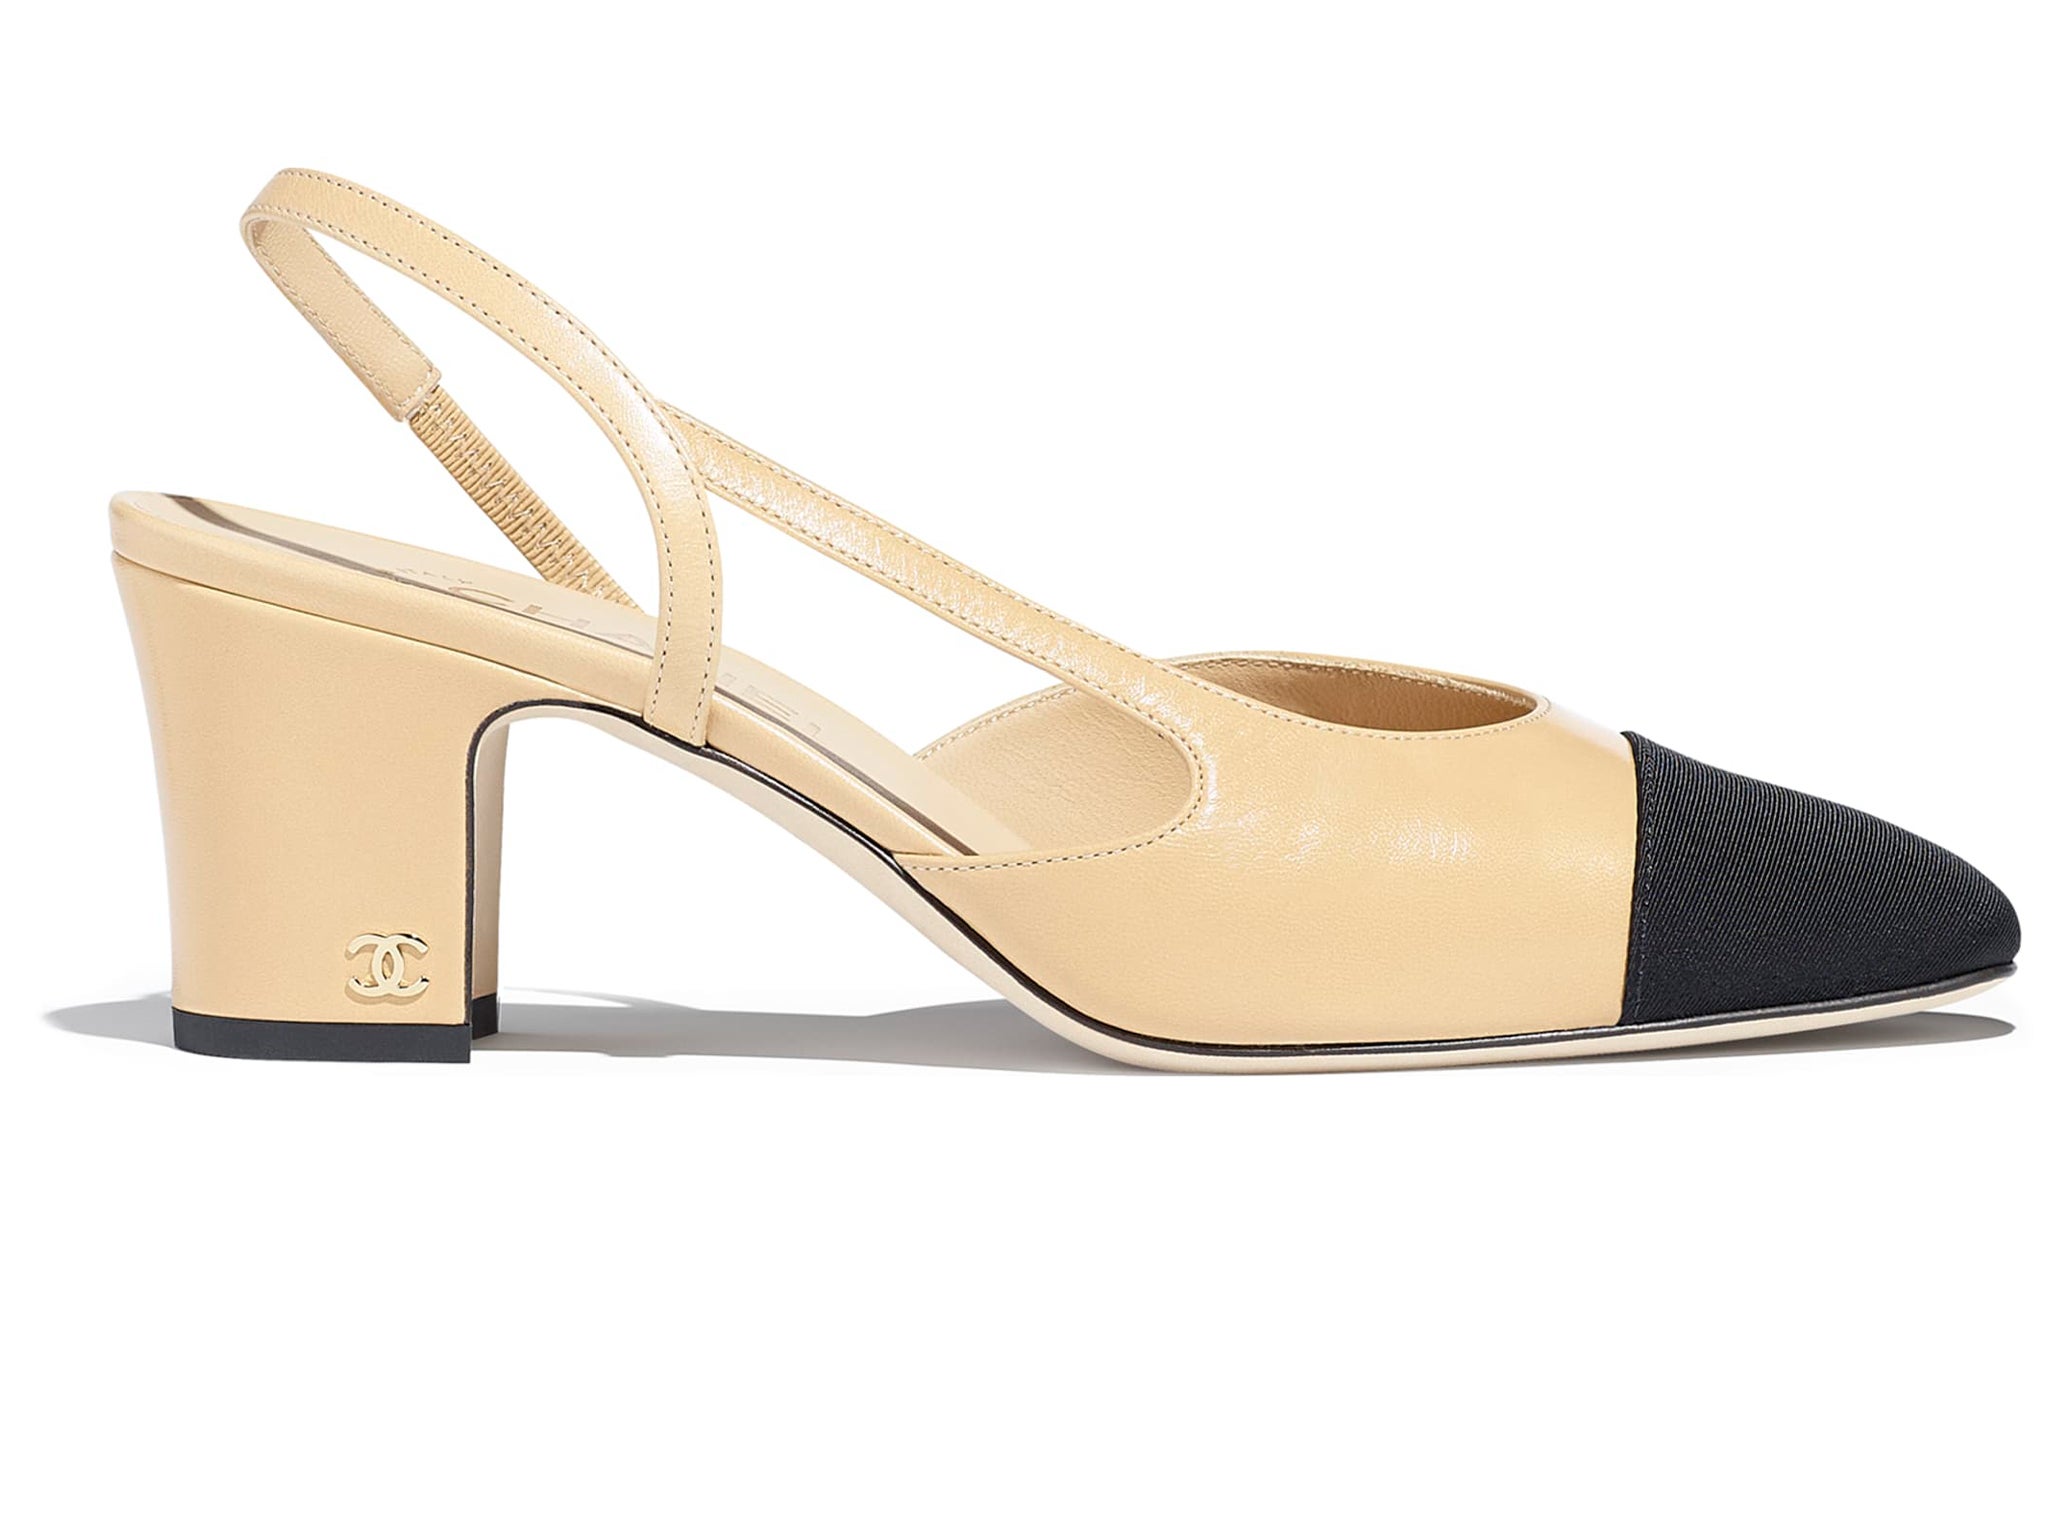 M&S's sell-out dupe of Chanel's £770 slingback heels are back for